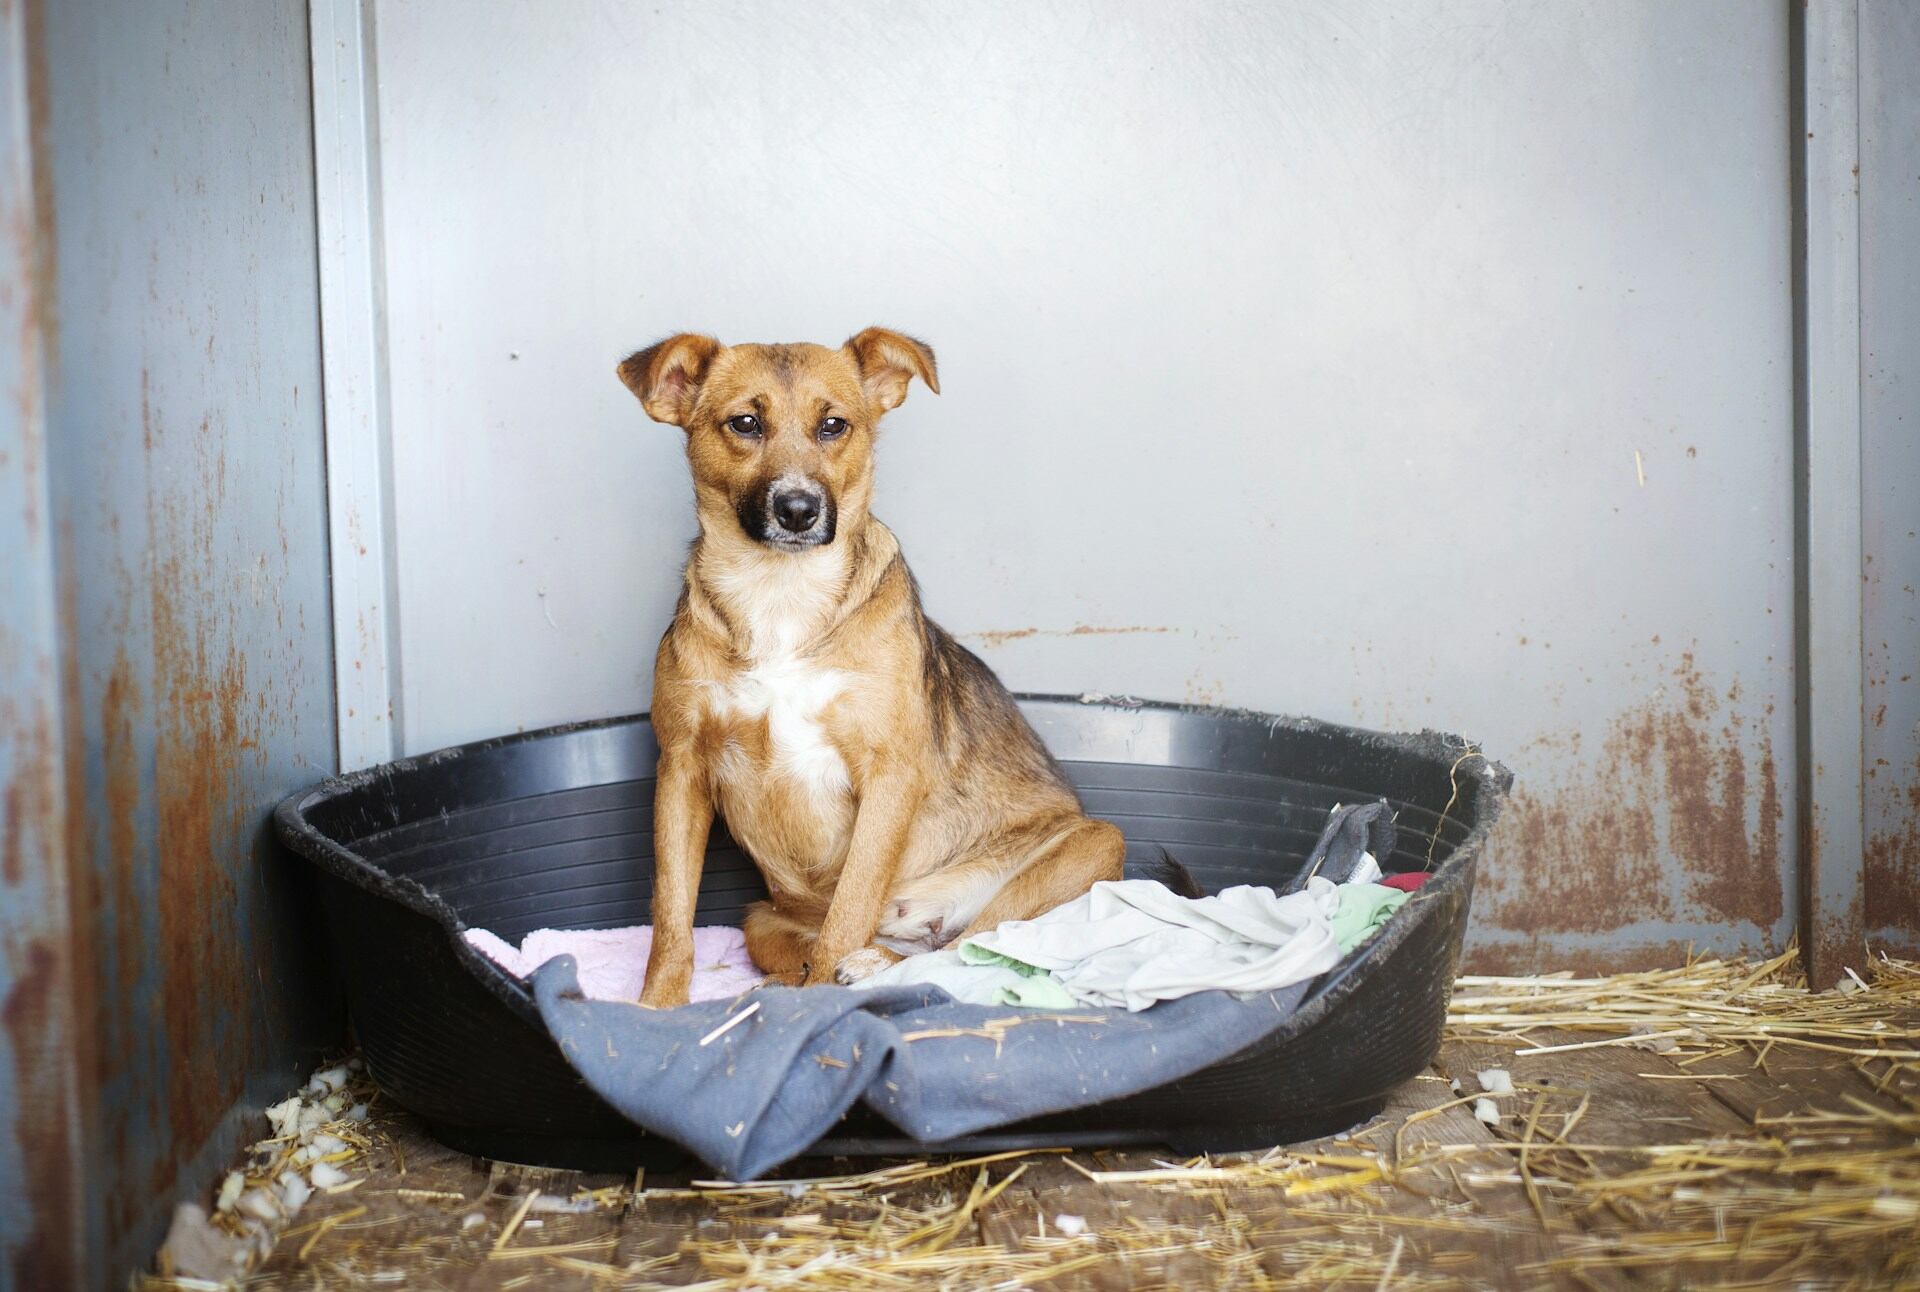 A sick dog sitting in a basket with a bundle of cloths